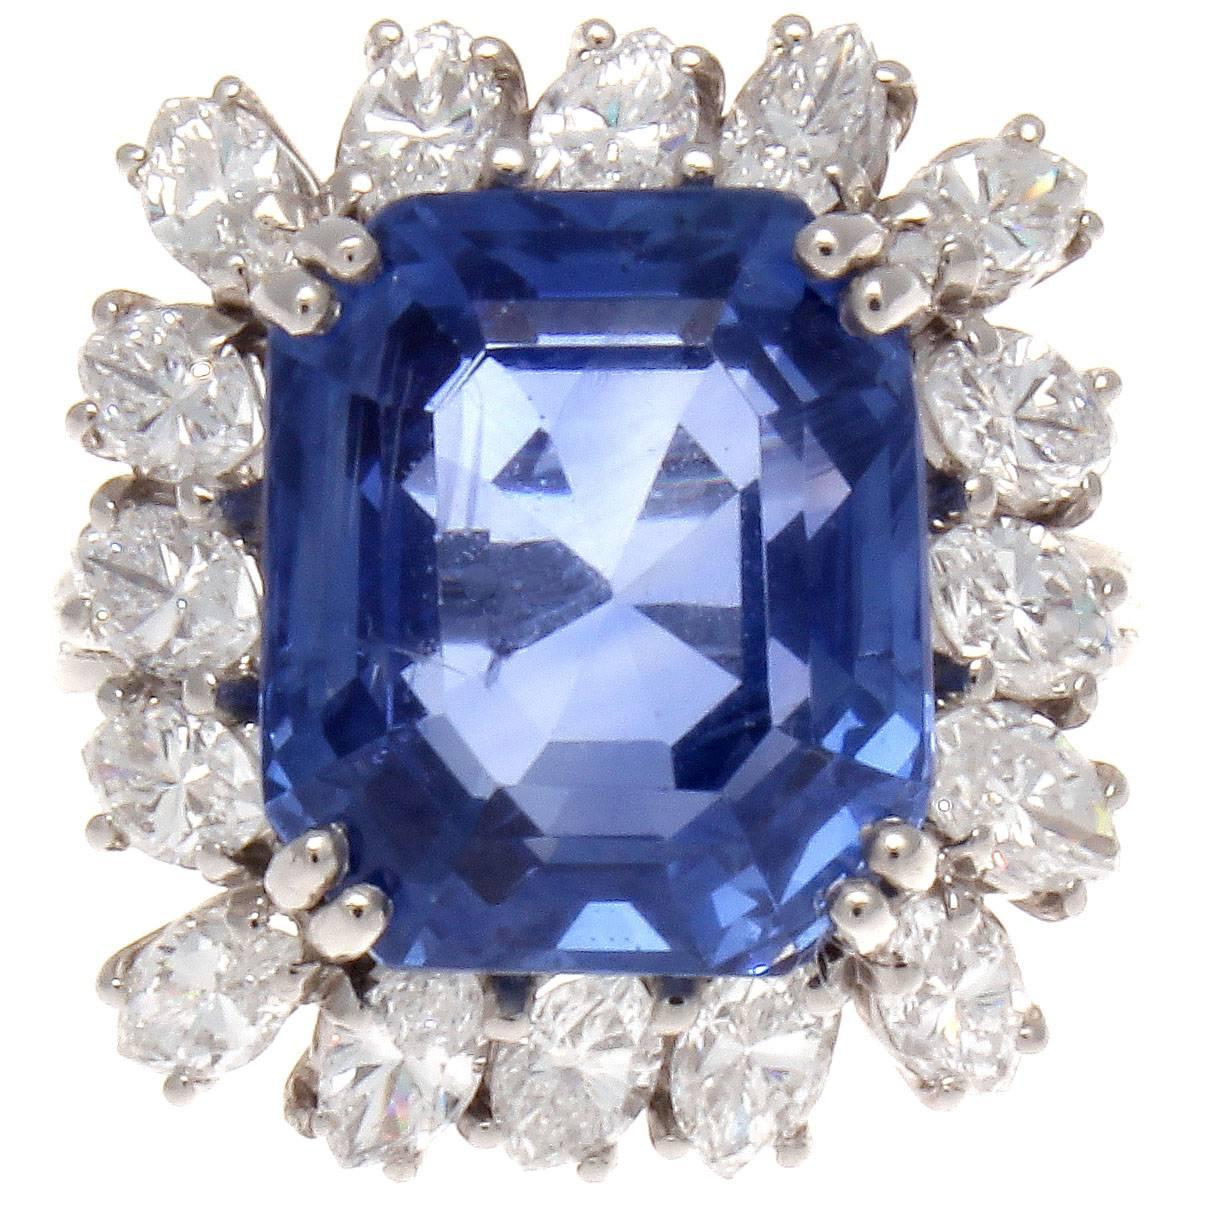 A mesmerizing design of serene color and superior style. Featuring a rare 11.76 cushion cut AGL certified ceylon sapphire that has no indications of heat treatment. The desire for these gemstones has dated throughout history with Marco Polo writing